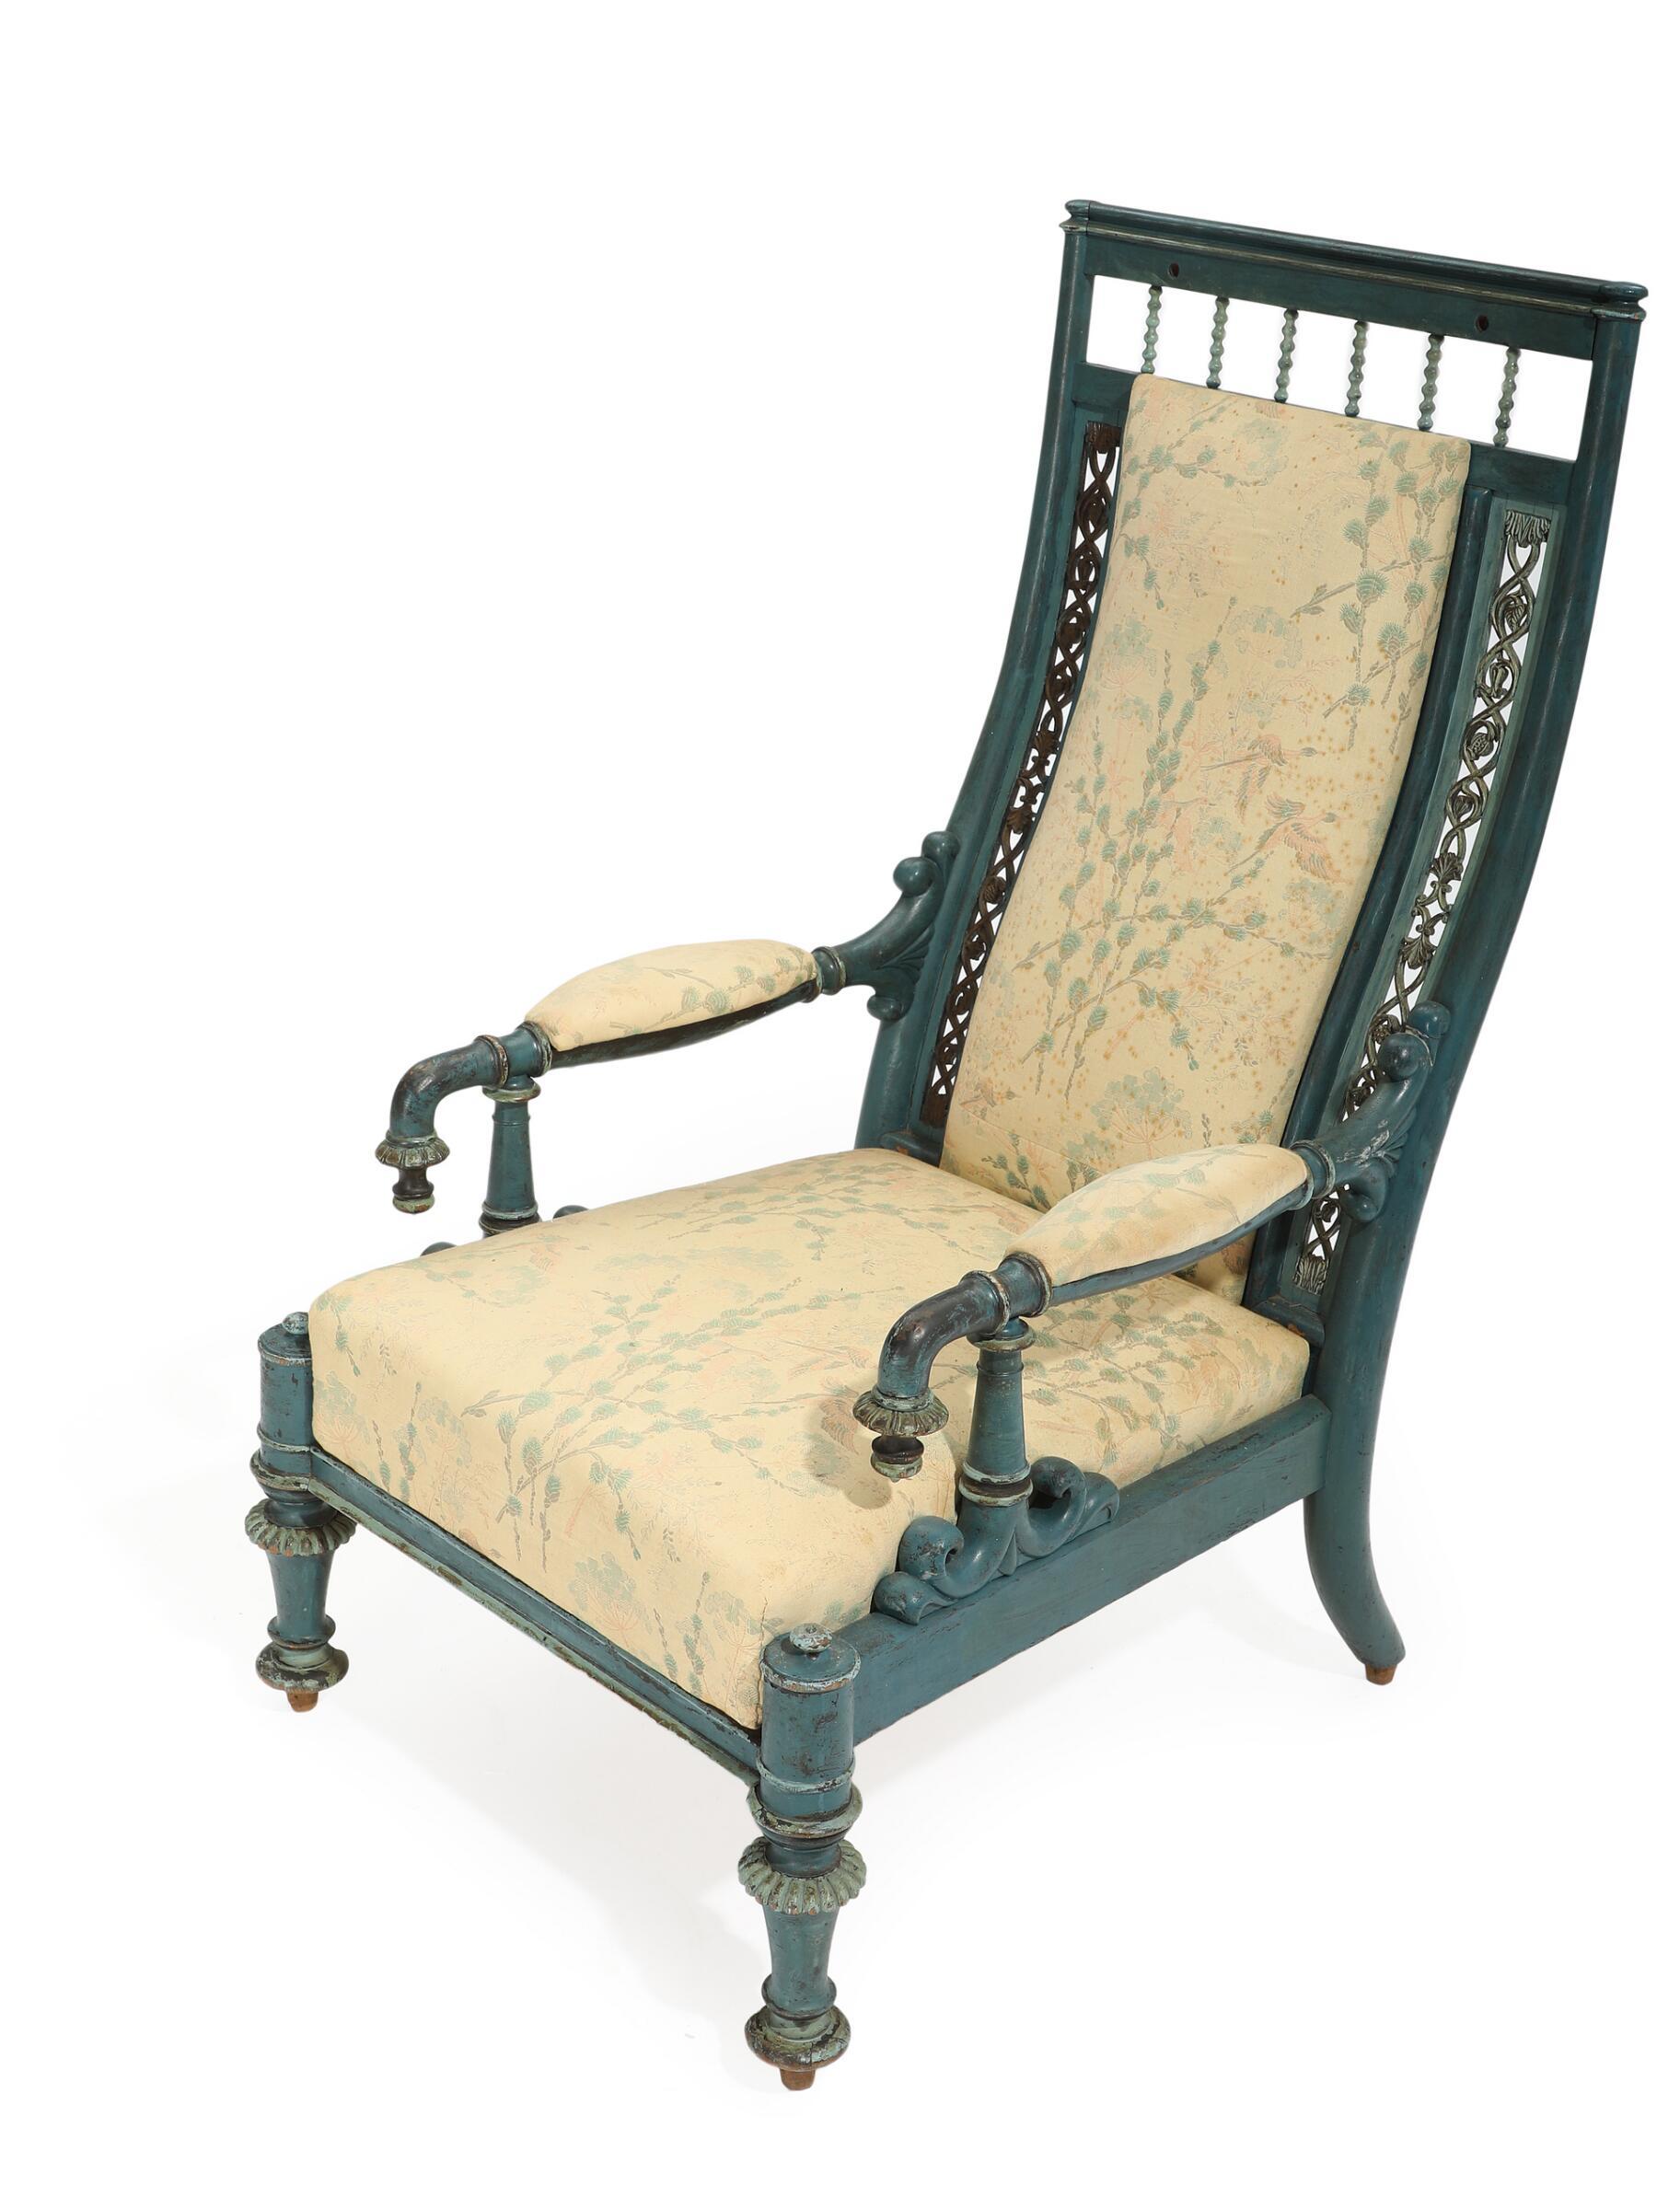 Blue-painted Bergere chair in the style of Danish architect, Gustav Friedrich Hetsch 1788-1864
The son of the German classical painter Philipp Friedrich von Hetsch (1758-1838), Gustav Friedrich Hetsch was active as an architect, designer and